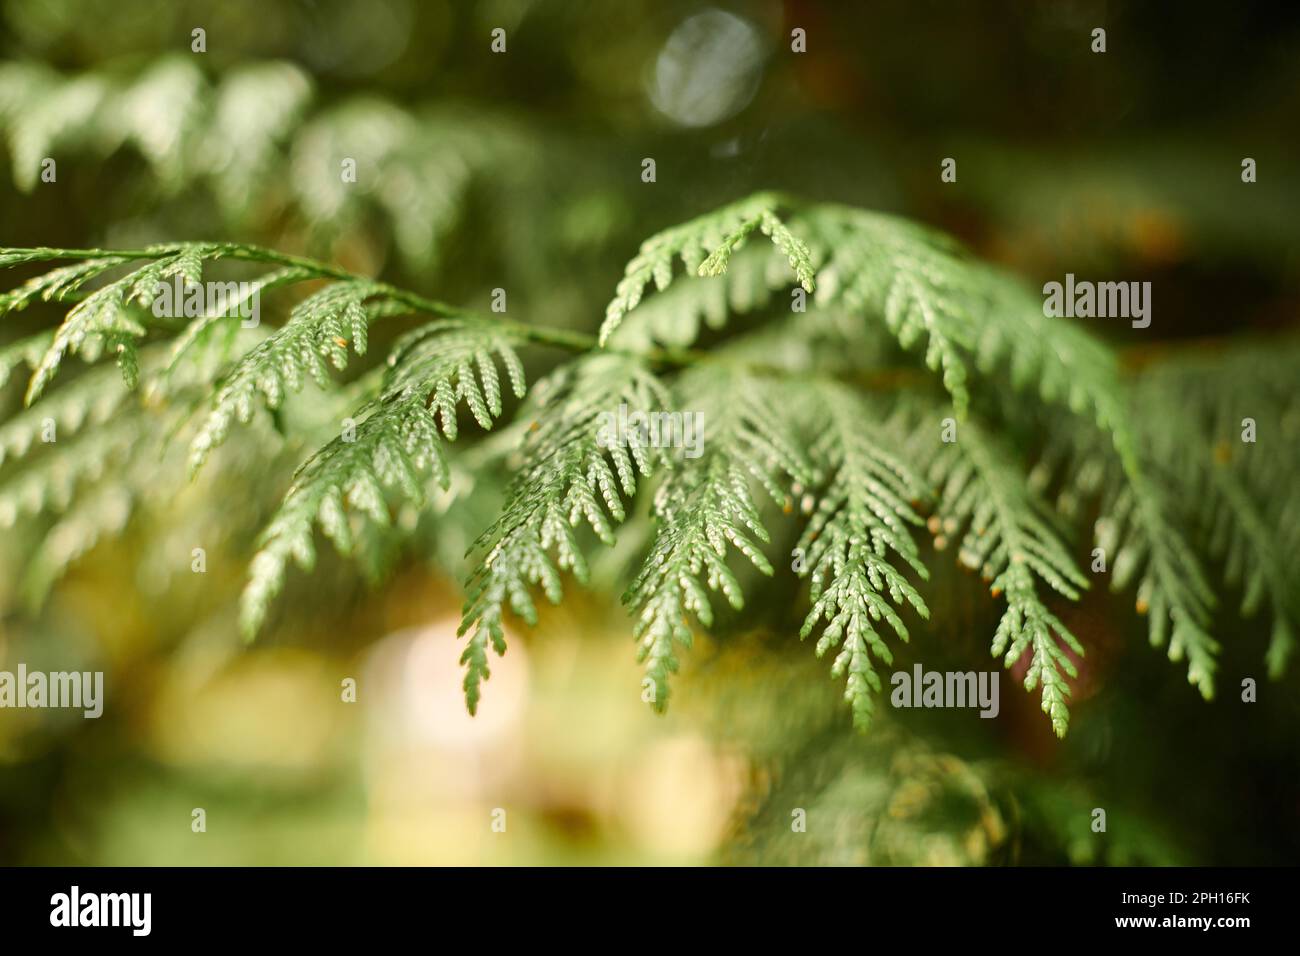 Western red cedar tree branch foliage close up with green bokeh forest background, beautiful evergreen coniferous tree in public park. Western redceda Stock Photo